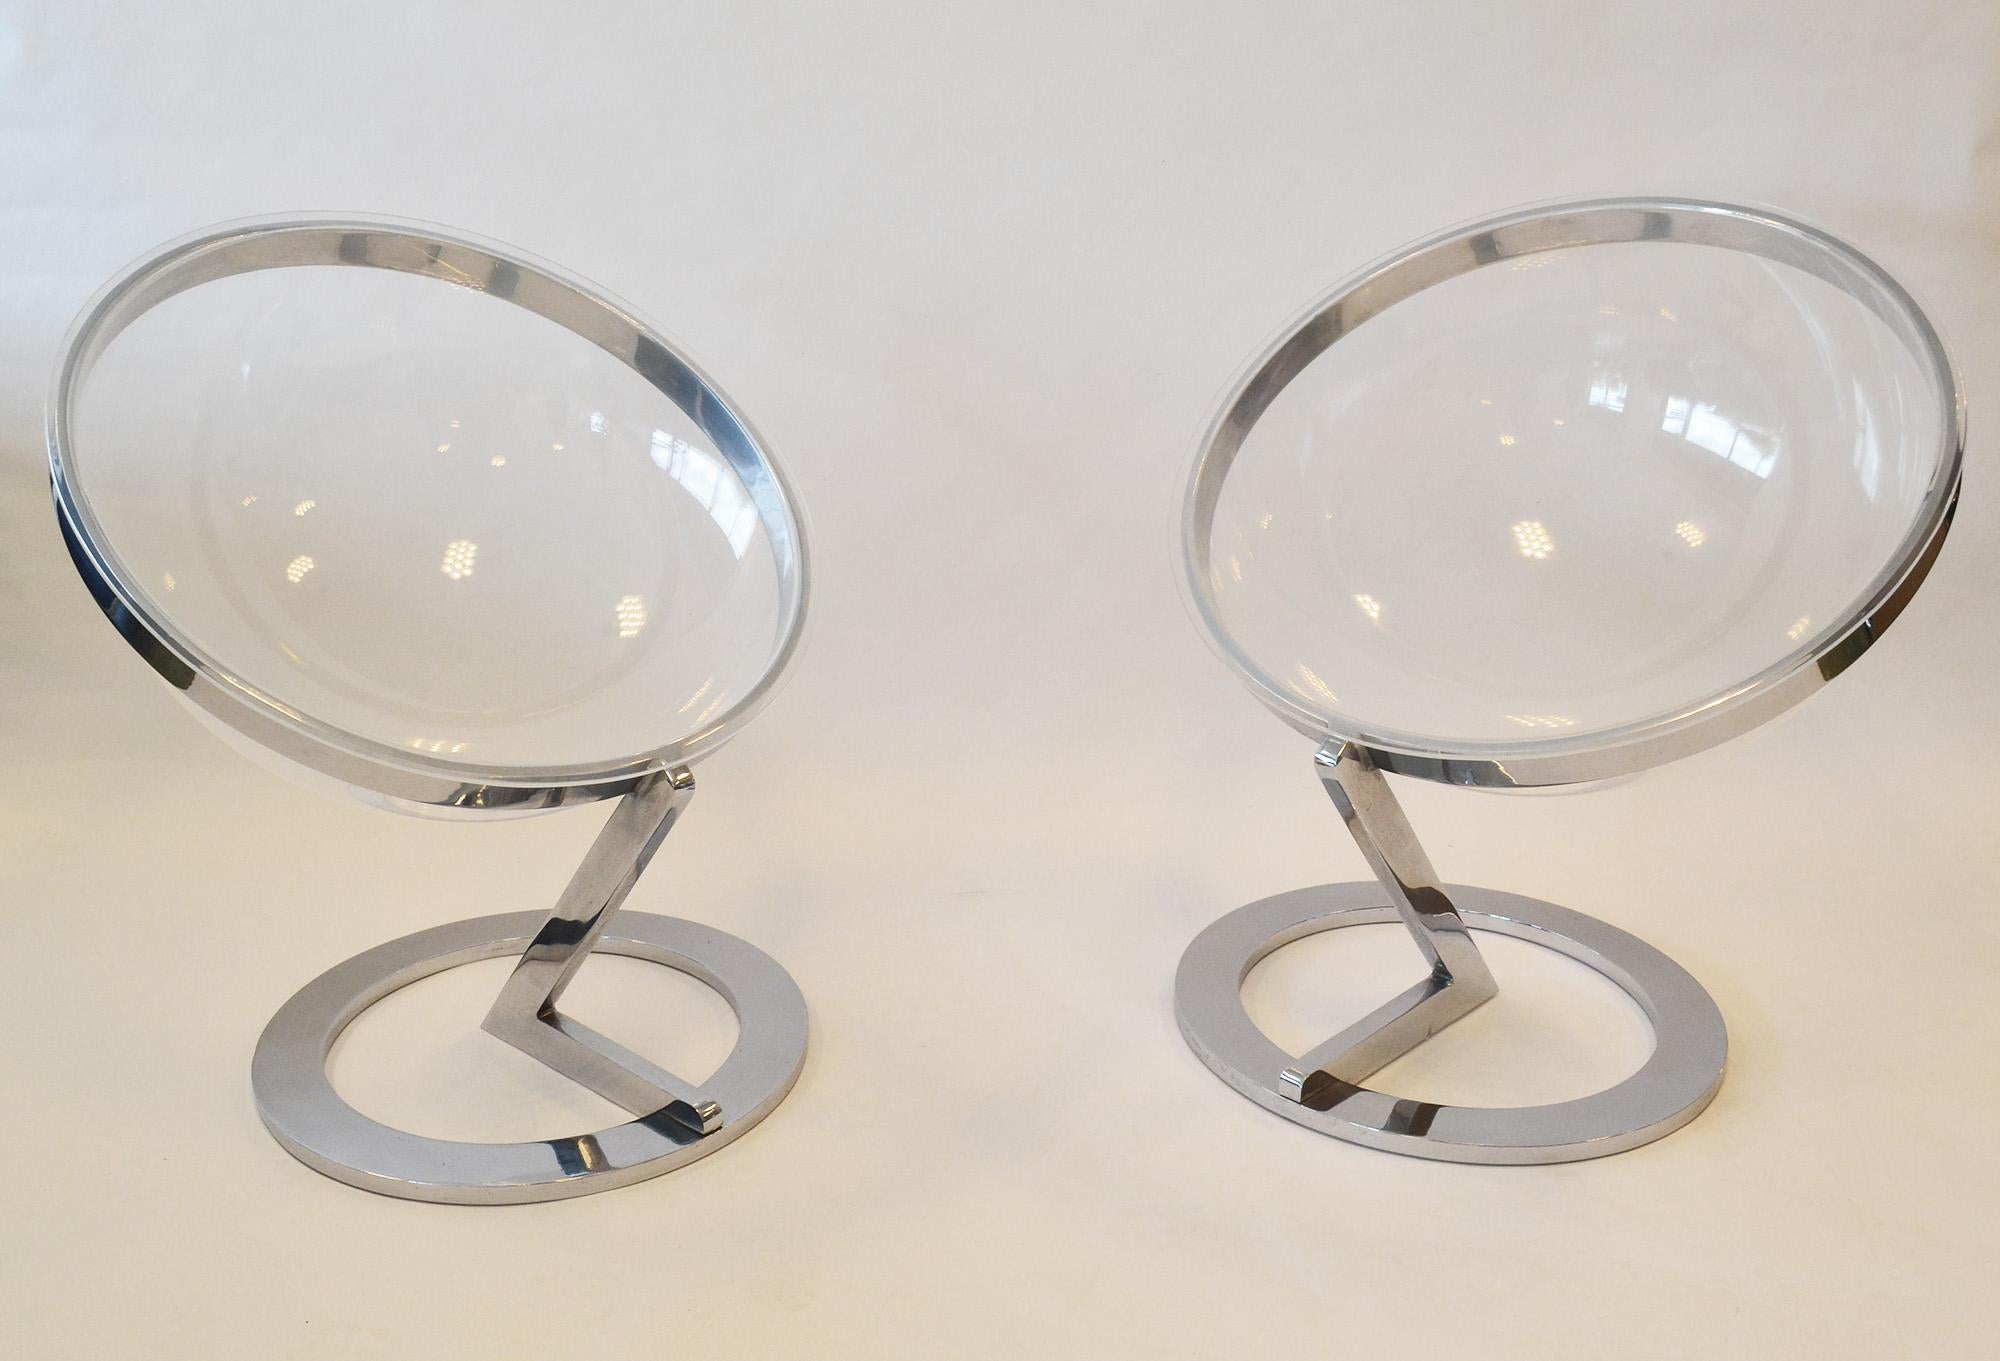 Pair of Space Age Acrylic and Steel Bubble Lounge Chairs after Daninos, 70s  For Sale 2